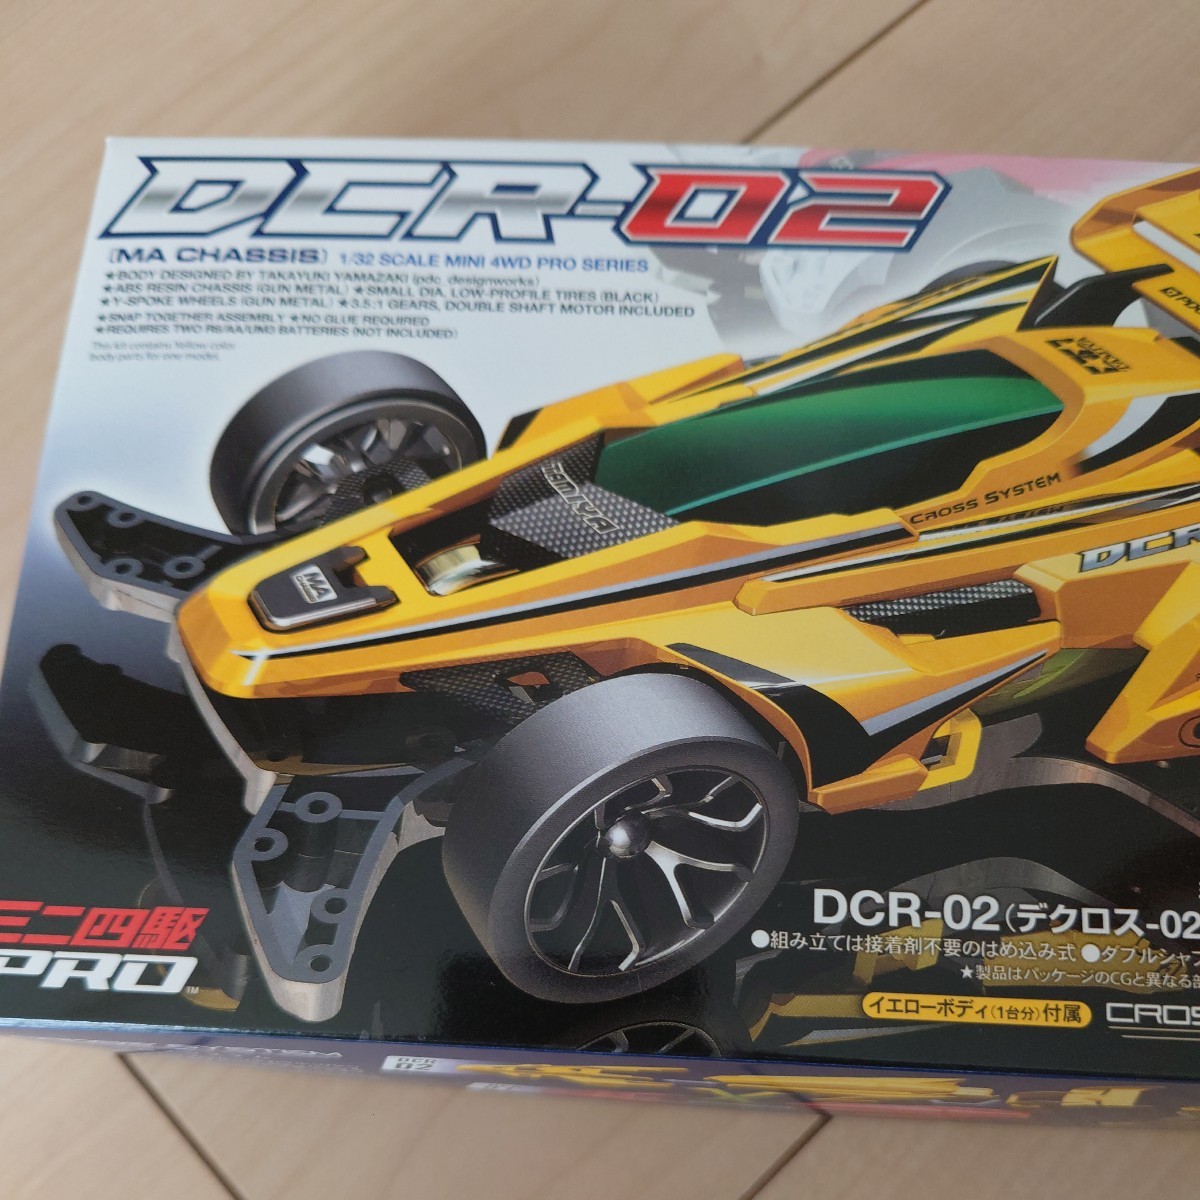 TAMIYA DCR-02 Decross Zero Two (MA CHASSIS) 1/32 SCALE 